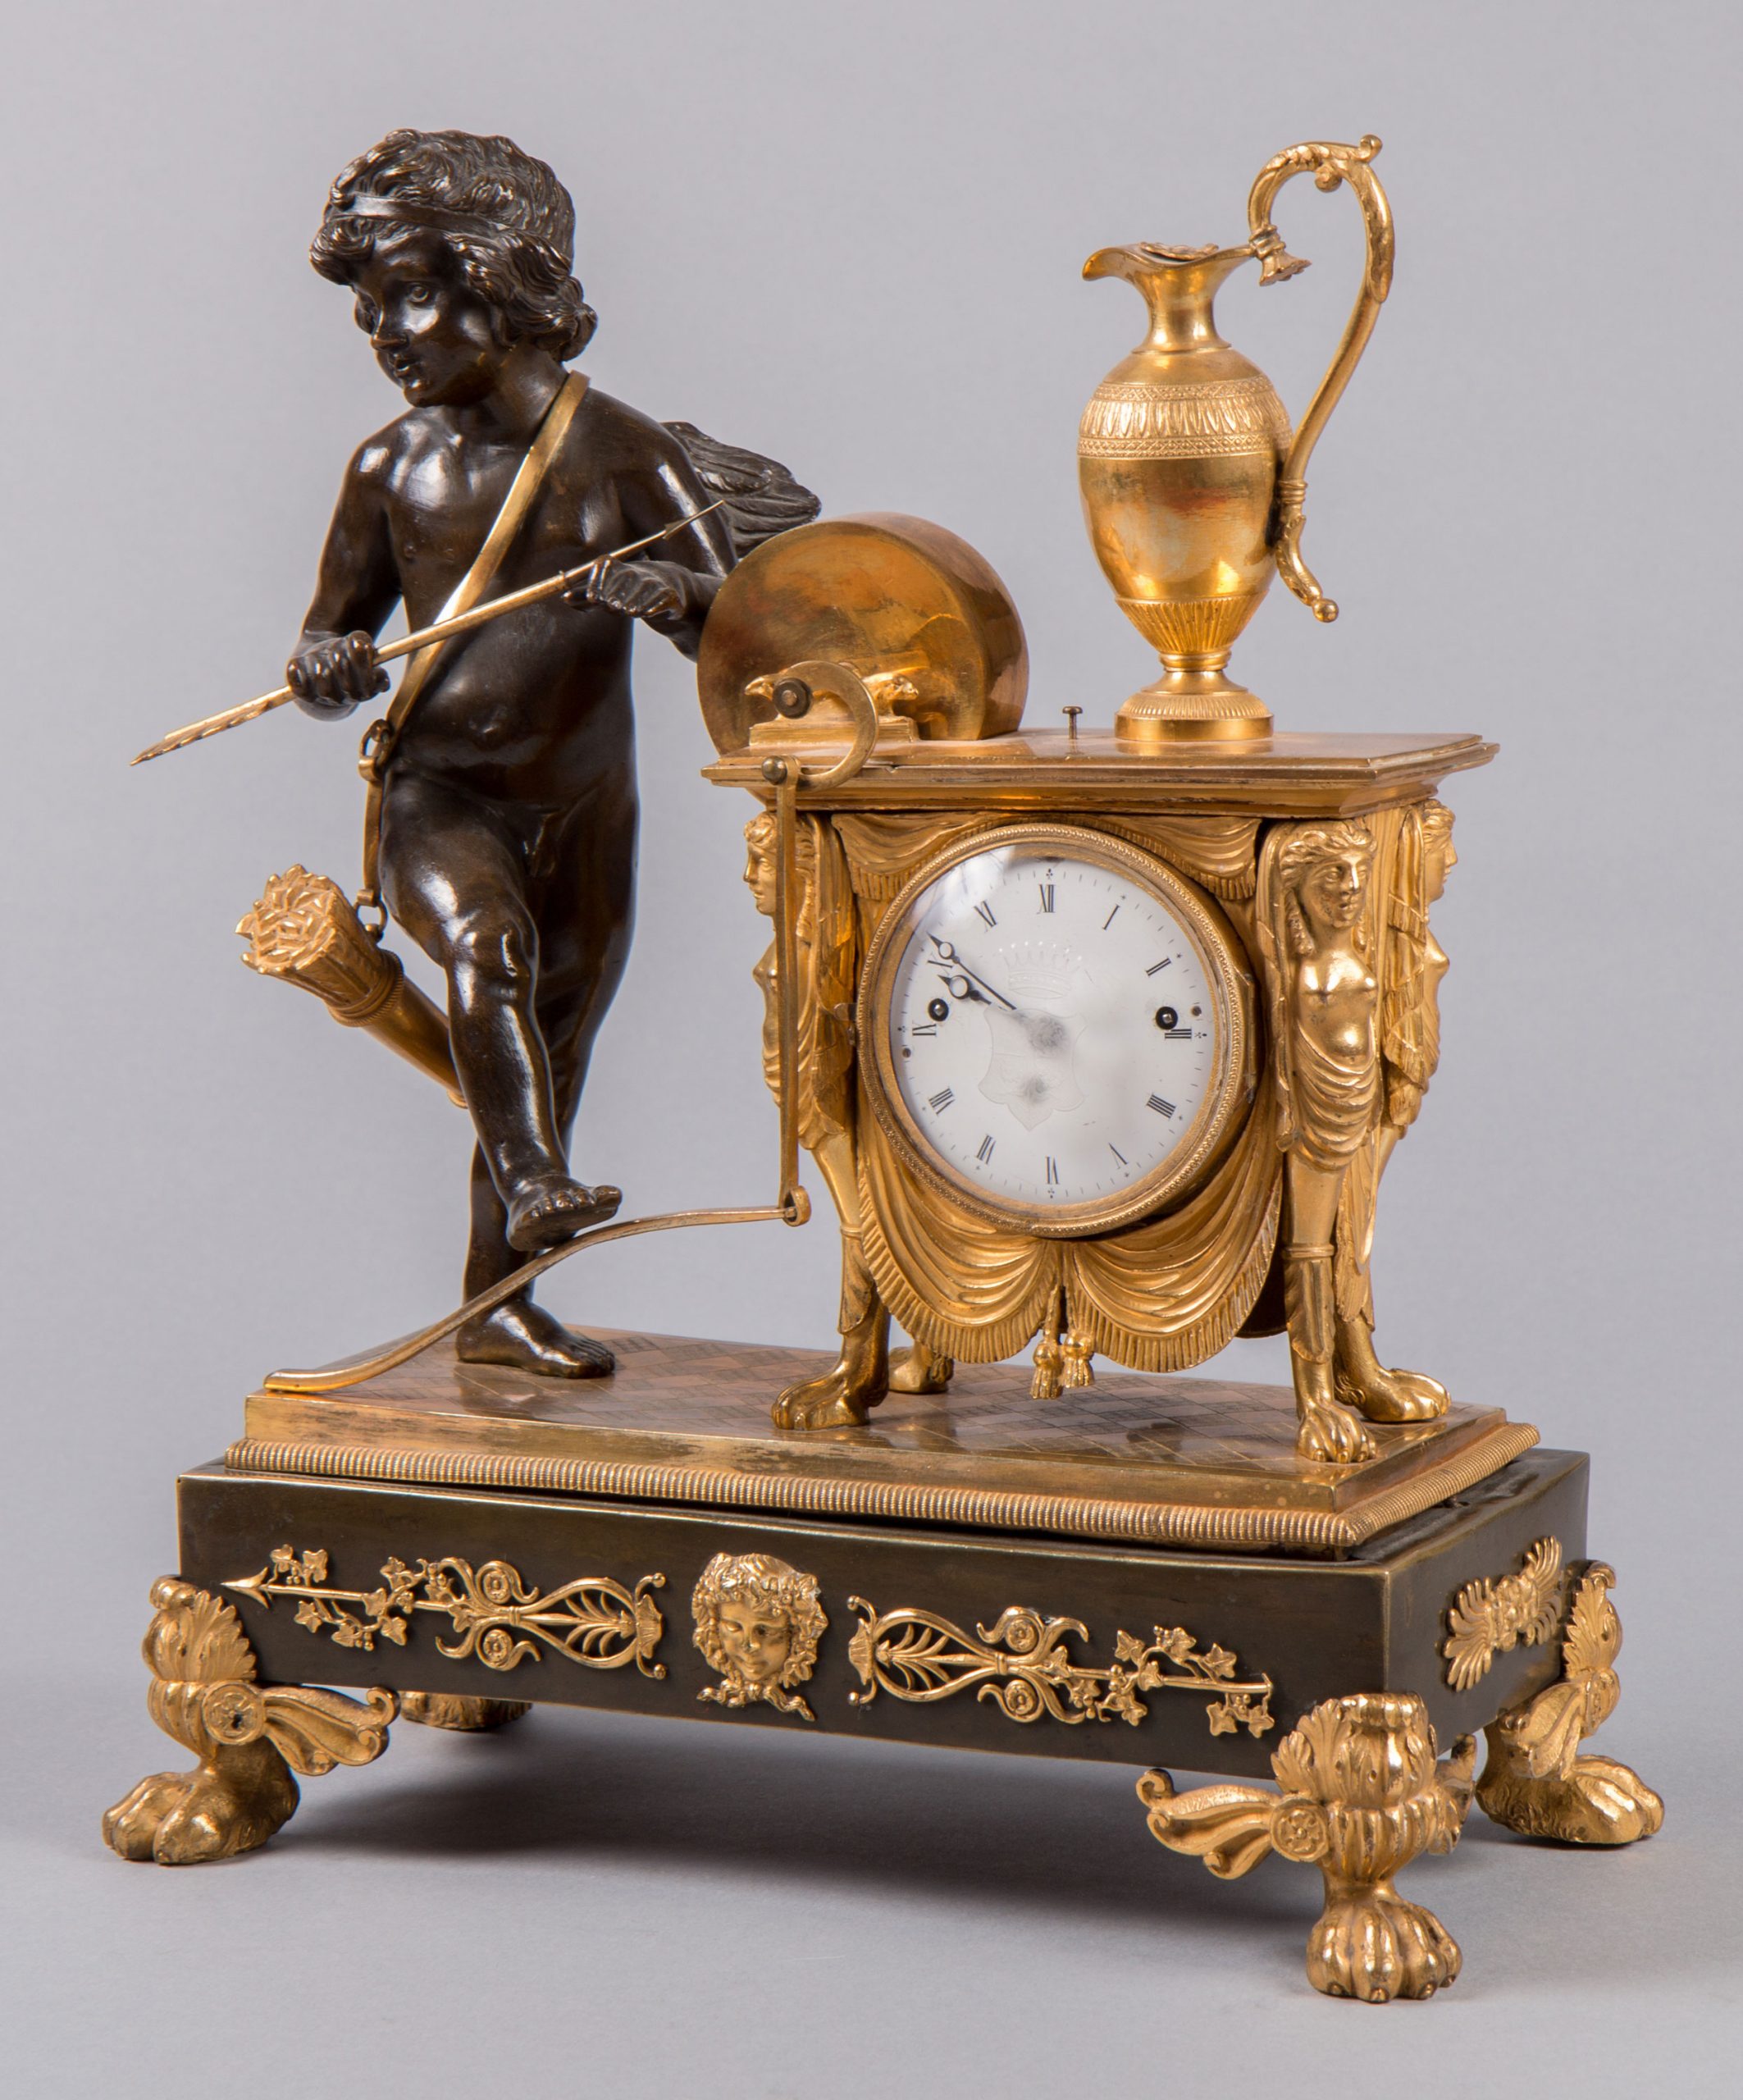 Figural empire mantel clock “Amor” Stephan Andréewitch 